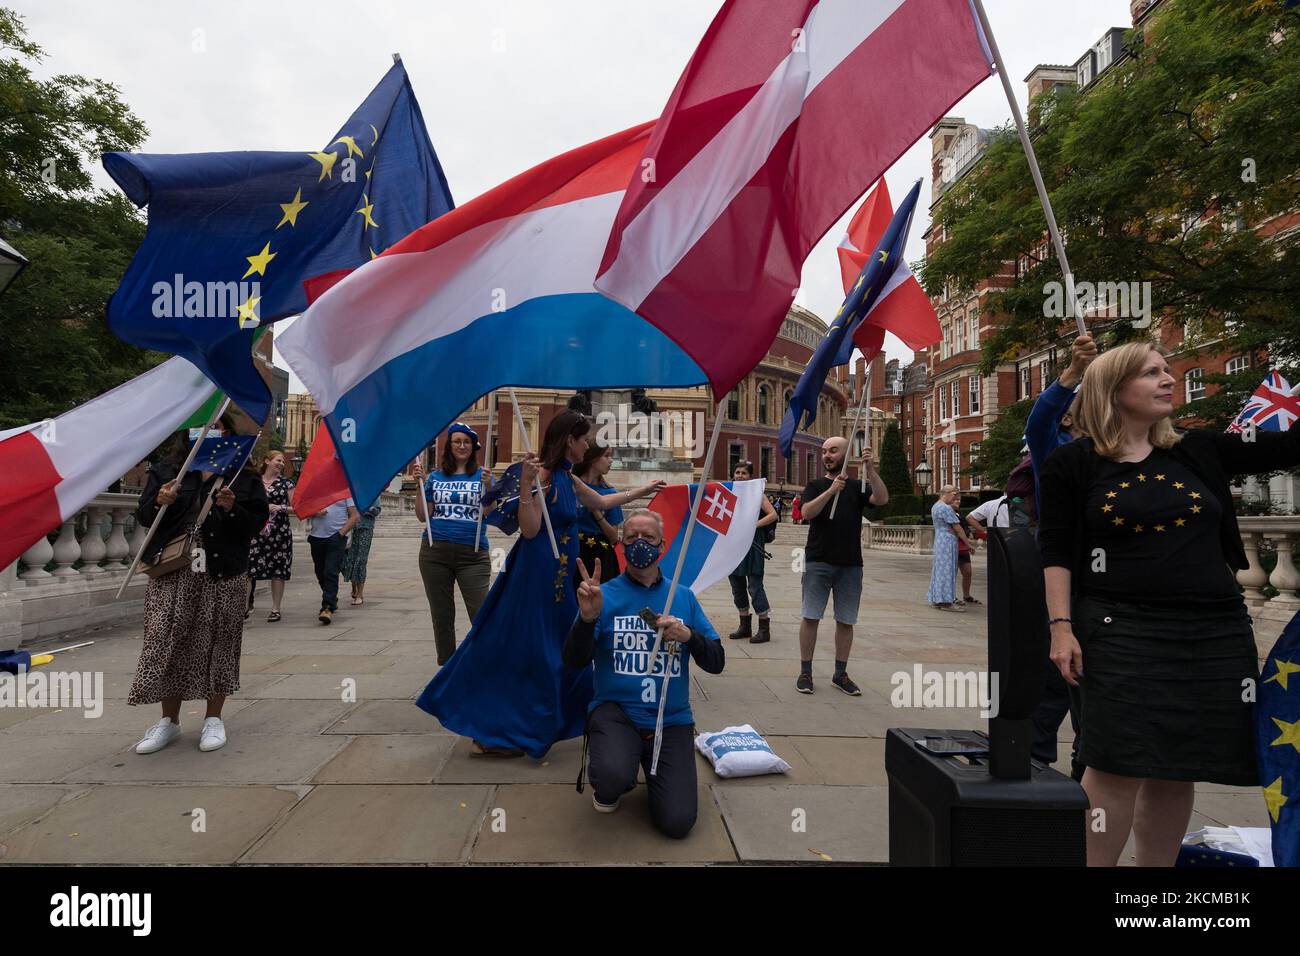 LONDON, UNITED KINGDOM - SEPTEMBER 11, 2021: Pro-EU activists and musicians wave flags of EU and its member states outside Royal Albert Hall ahead of the Last Night of the Proms to highlight lack of post-Brexit agreement for touring arts on September 11, 2021 in London, England. The campaigners call for the government to introduce a transitional support package to cover the additional post-Brexit expenses before securing an EU-wide touring artists visa waiver. (Photo by WIktor Szymanowicz/NurPhoto) Stock Photo